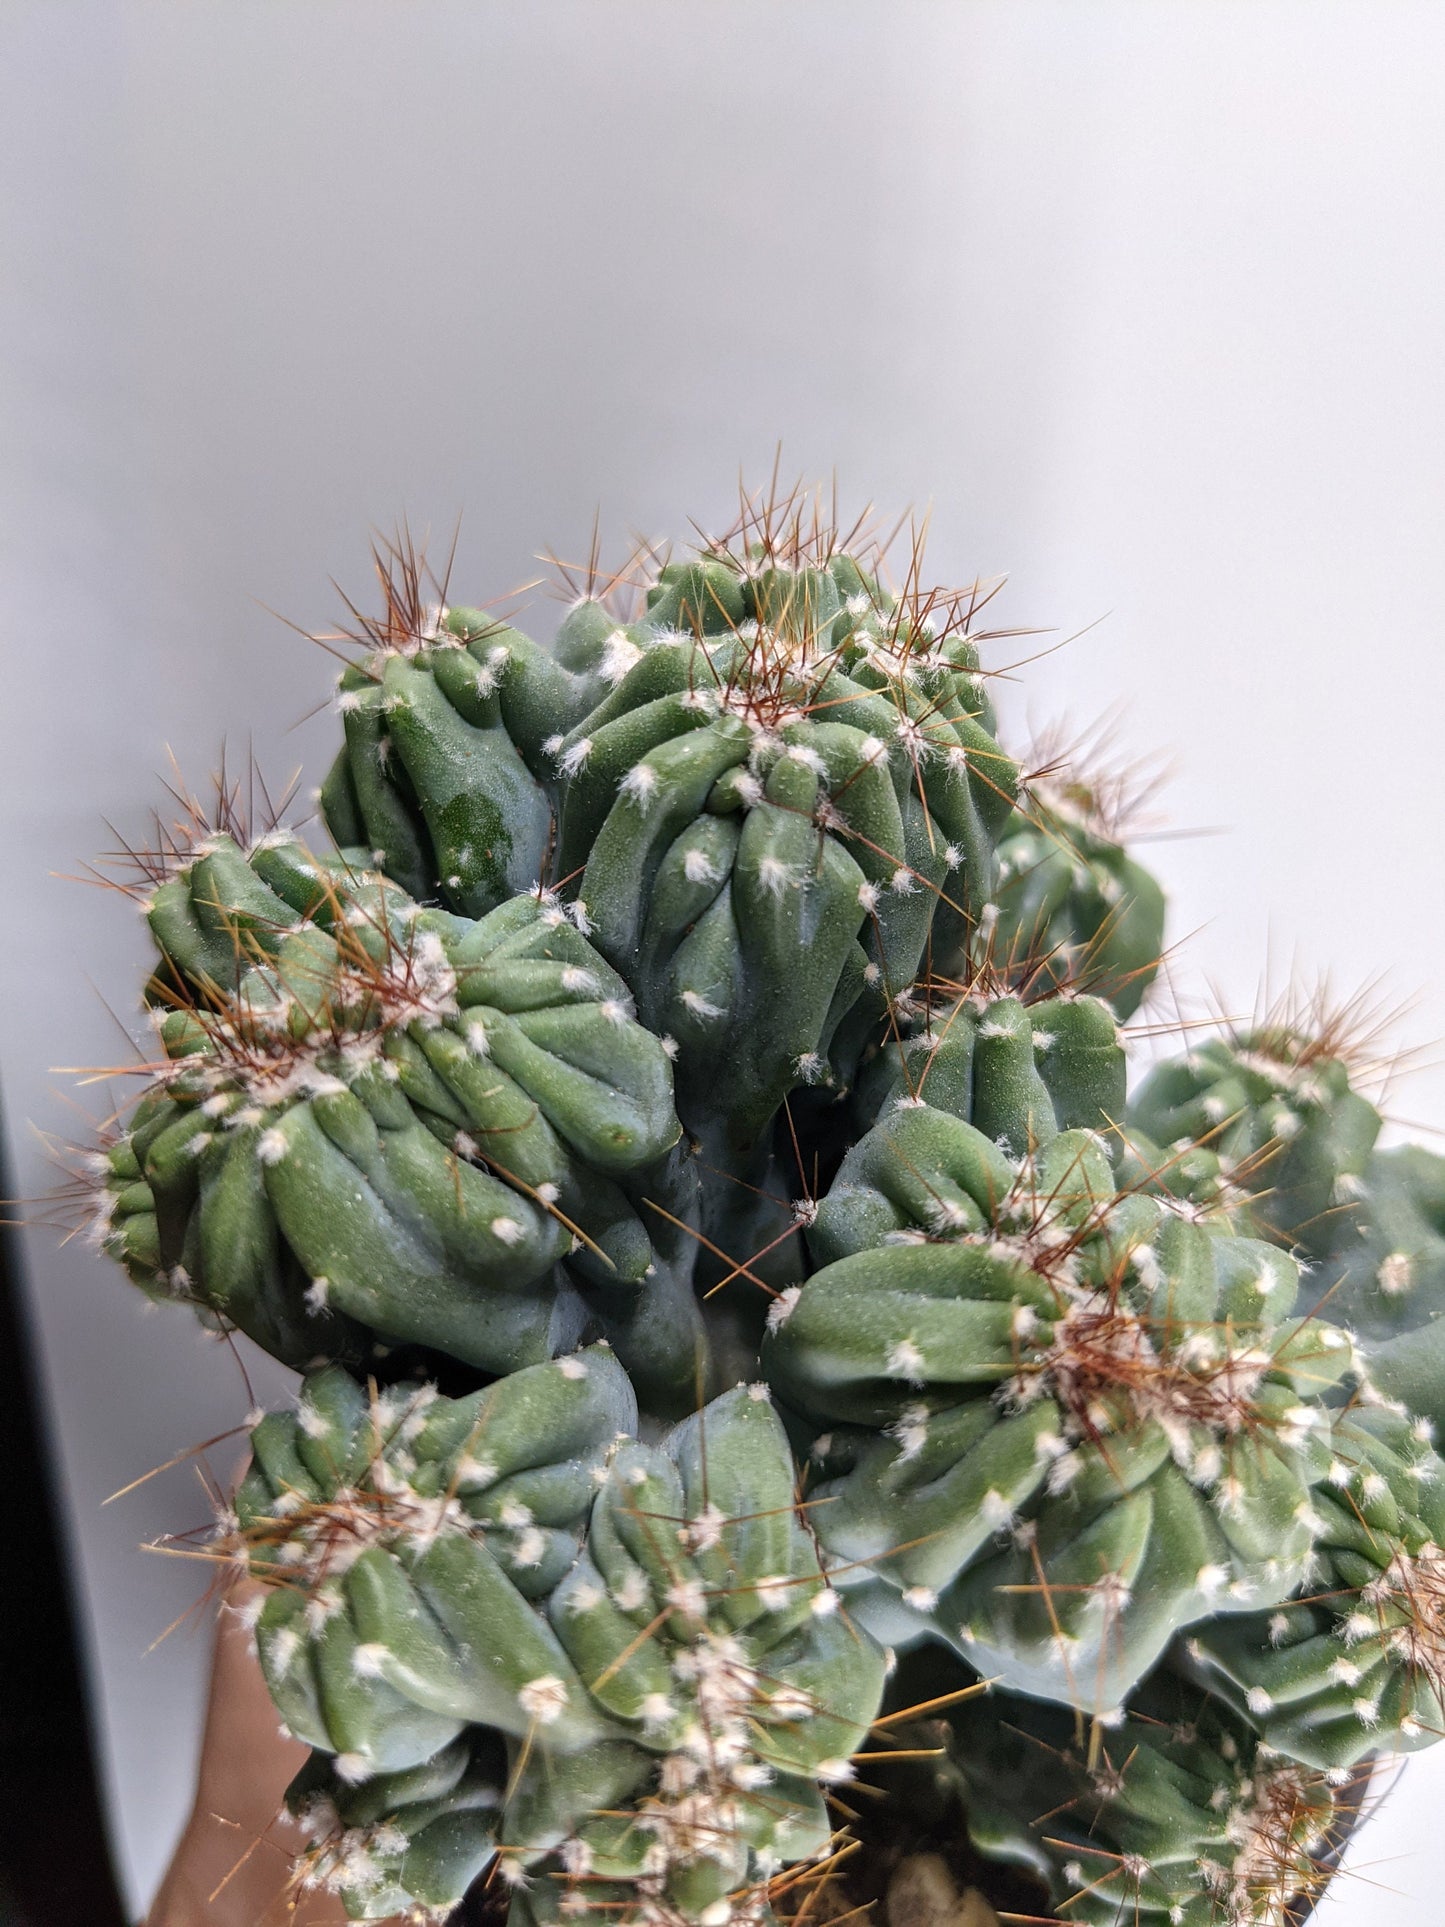 Ming Thing Crested RARE Cactus Alive NOT Grafted Fully Rooted! Crested Cacti Succulent Living Plant